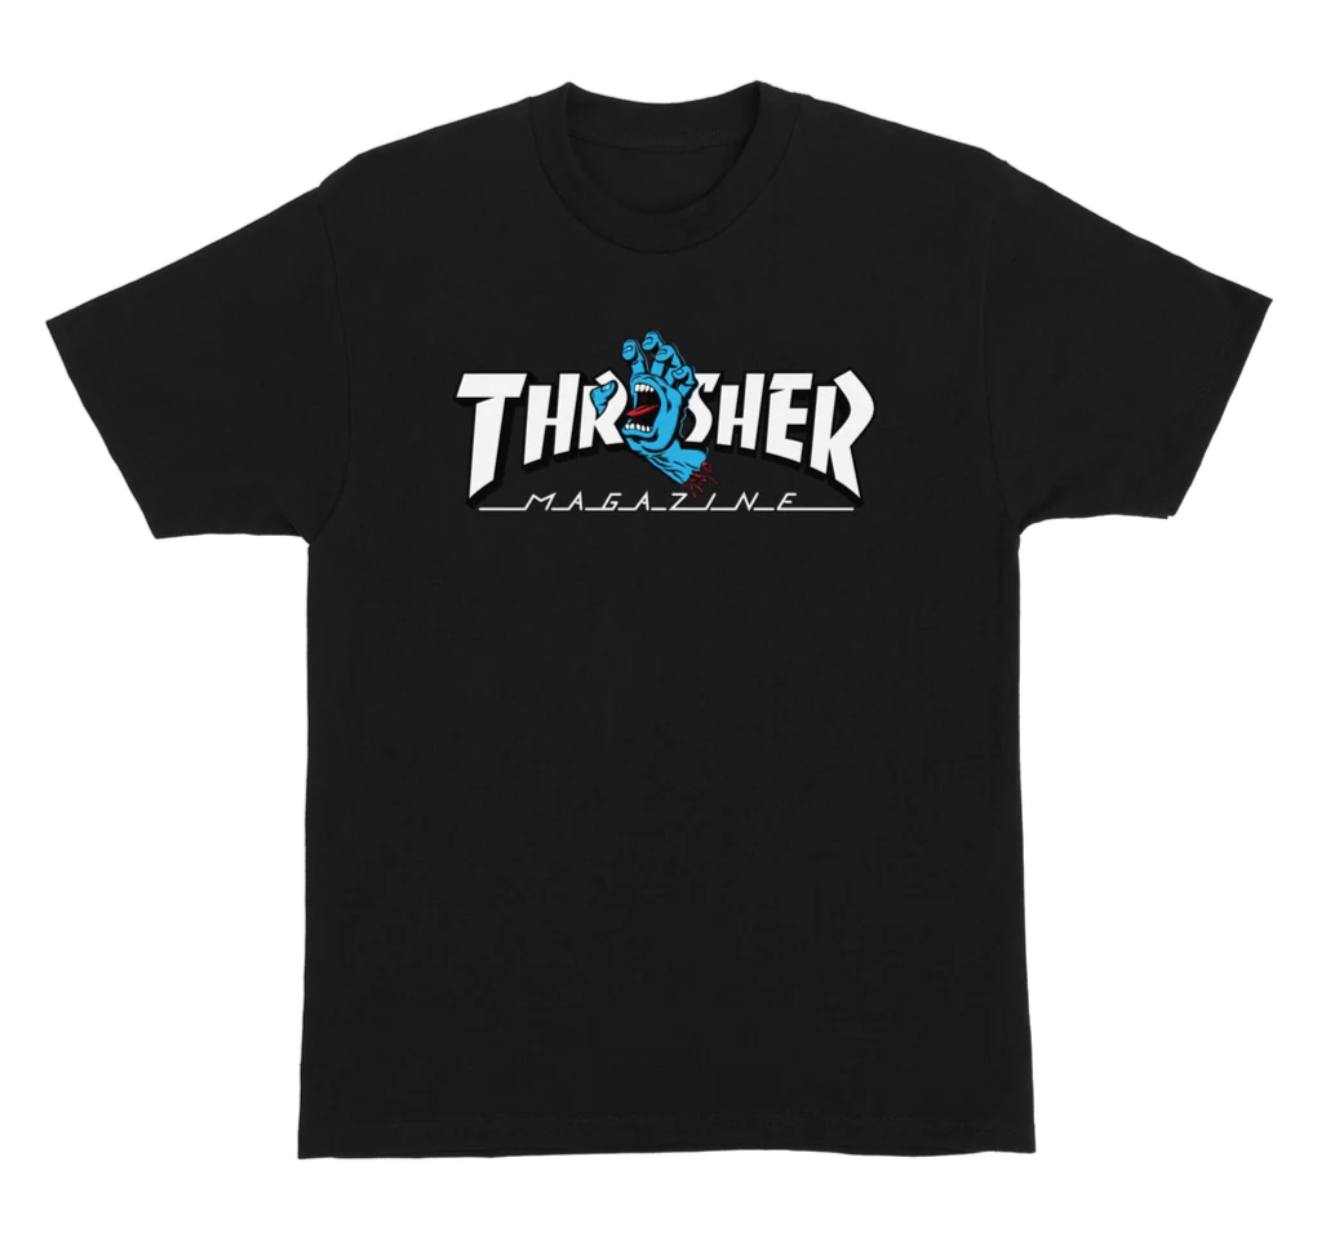 Thrasher links up with Santa Cruz Skateboards to drop one the most firing collaborations of the year. COTY? The new Thrasher Screaming Logo men's short-sleeve regular fit t-shirt features large front Santa Cruz x Thrasher Screaming logo printed in soft hand ink. Skate and destroy till the end